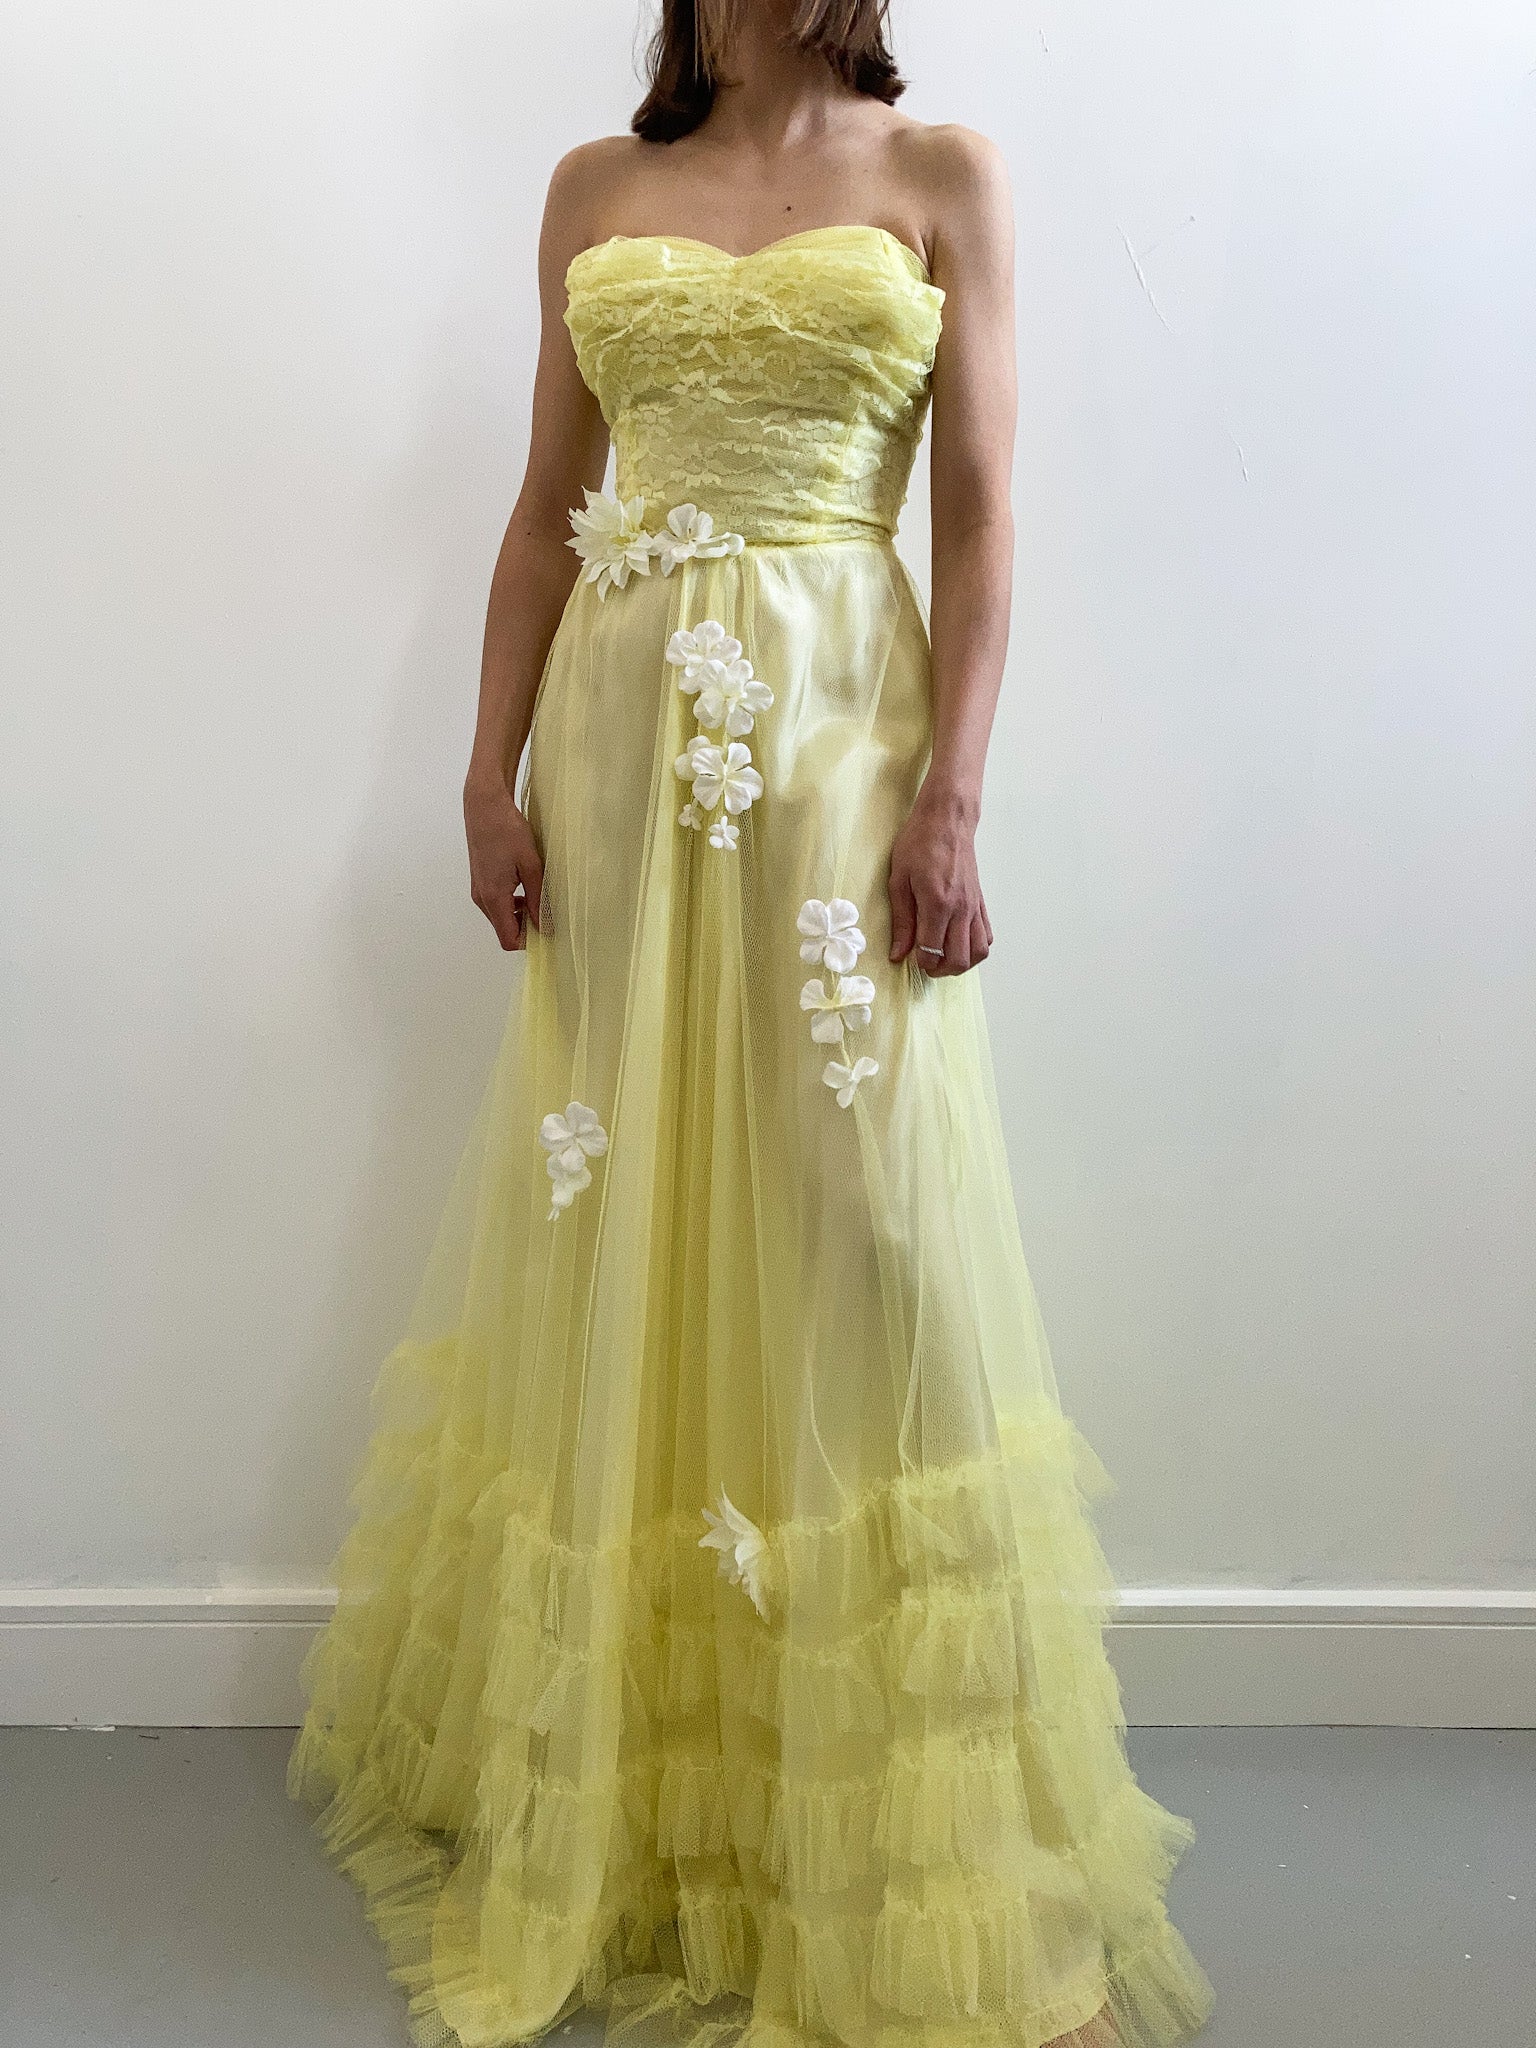 1930s Yellow Sweetheart Net and Flower Gown